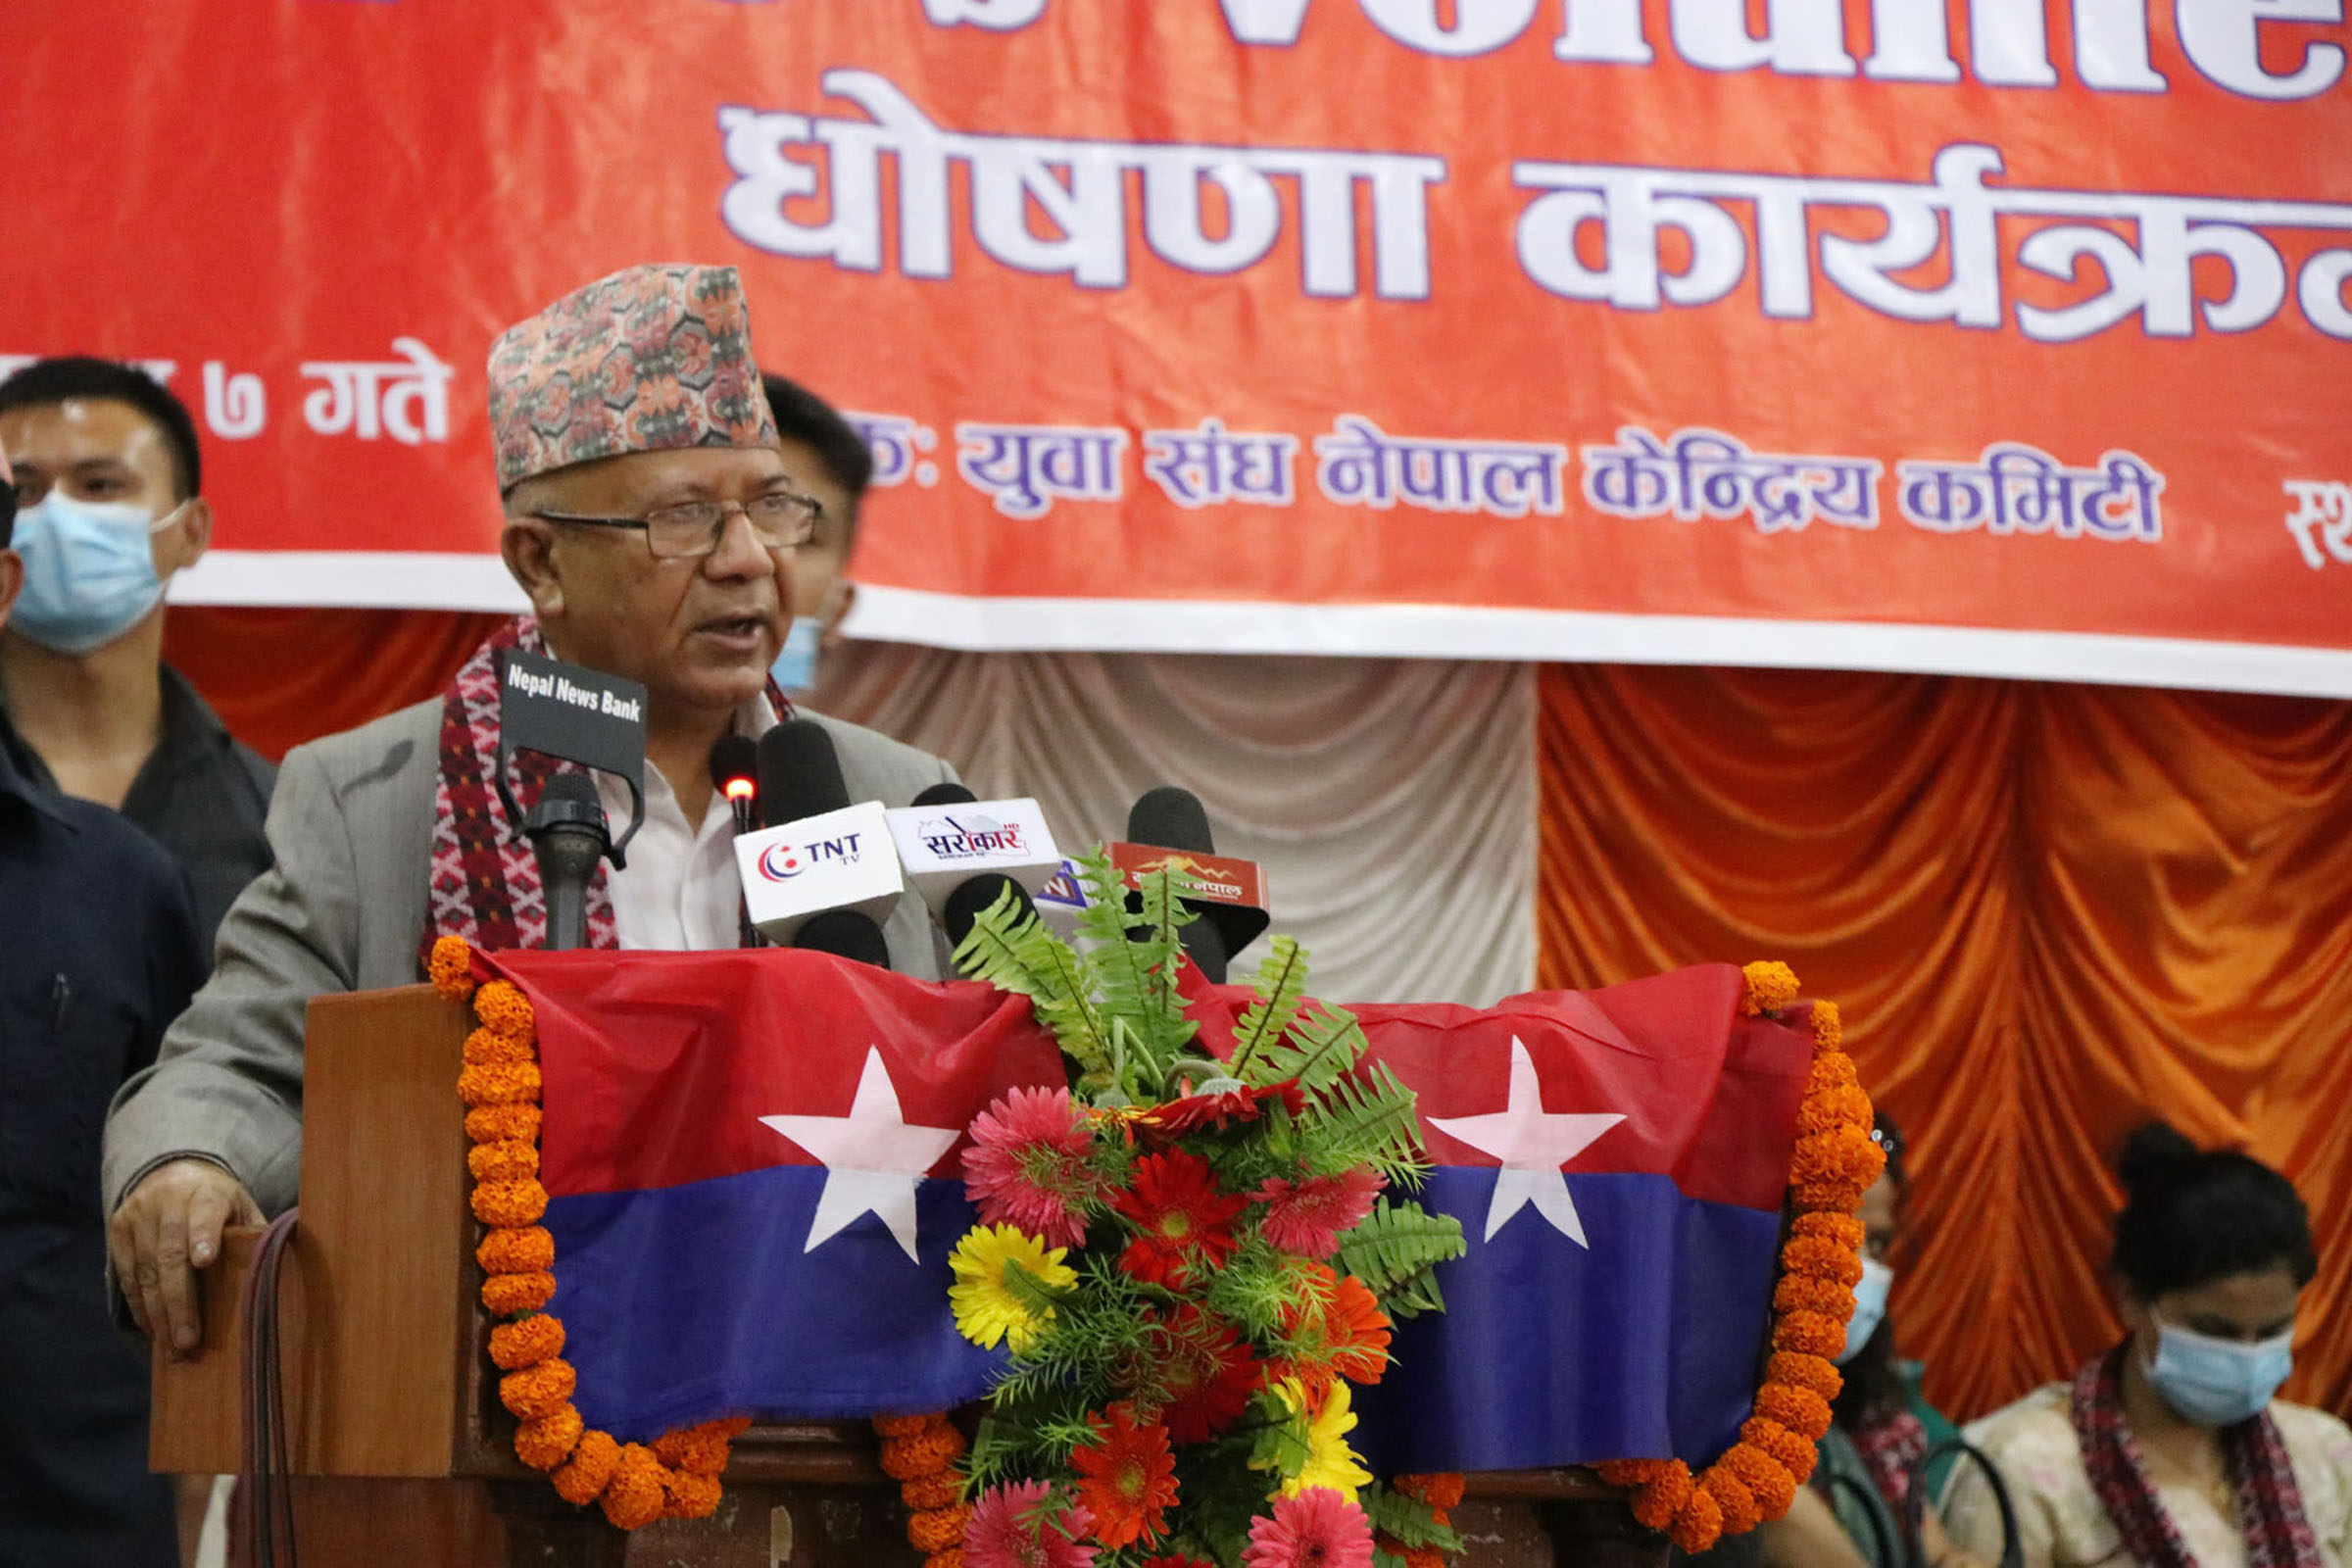 One cannot stay at his own home facing constant humiliation: UML leader Nepal